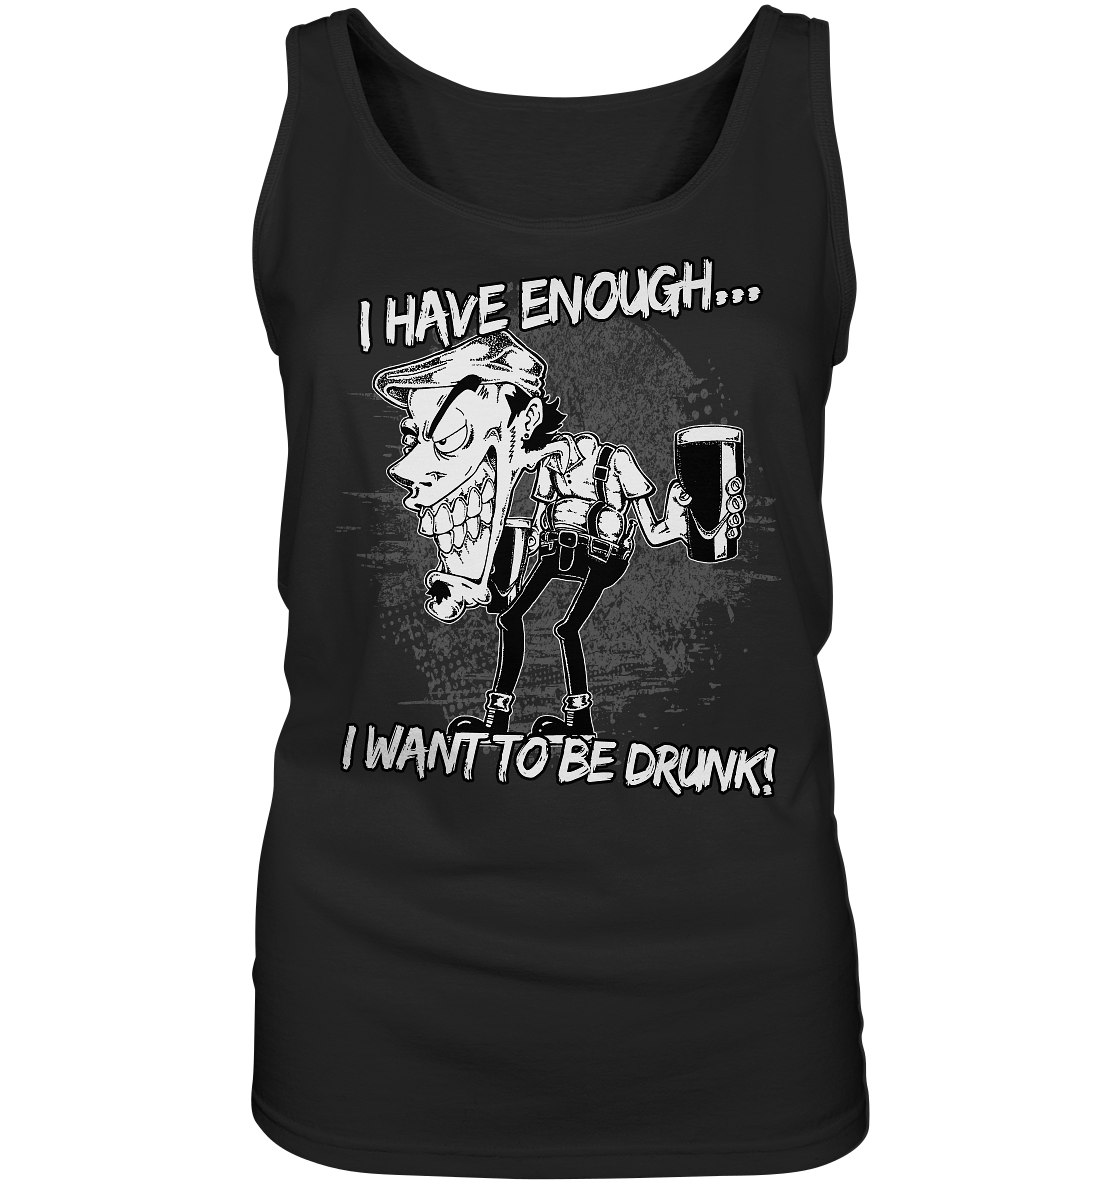 I Have Enough... "I Want To Be Drunk!" - Ladies Tank-Top